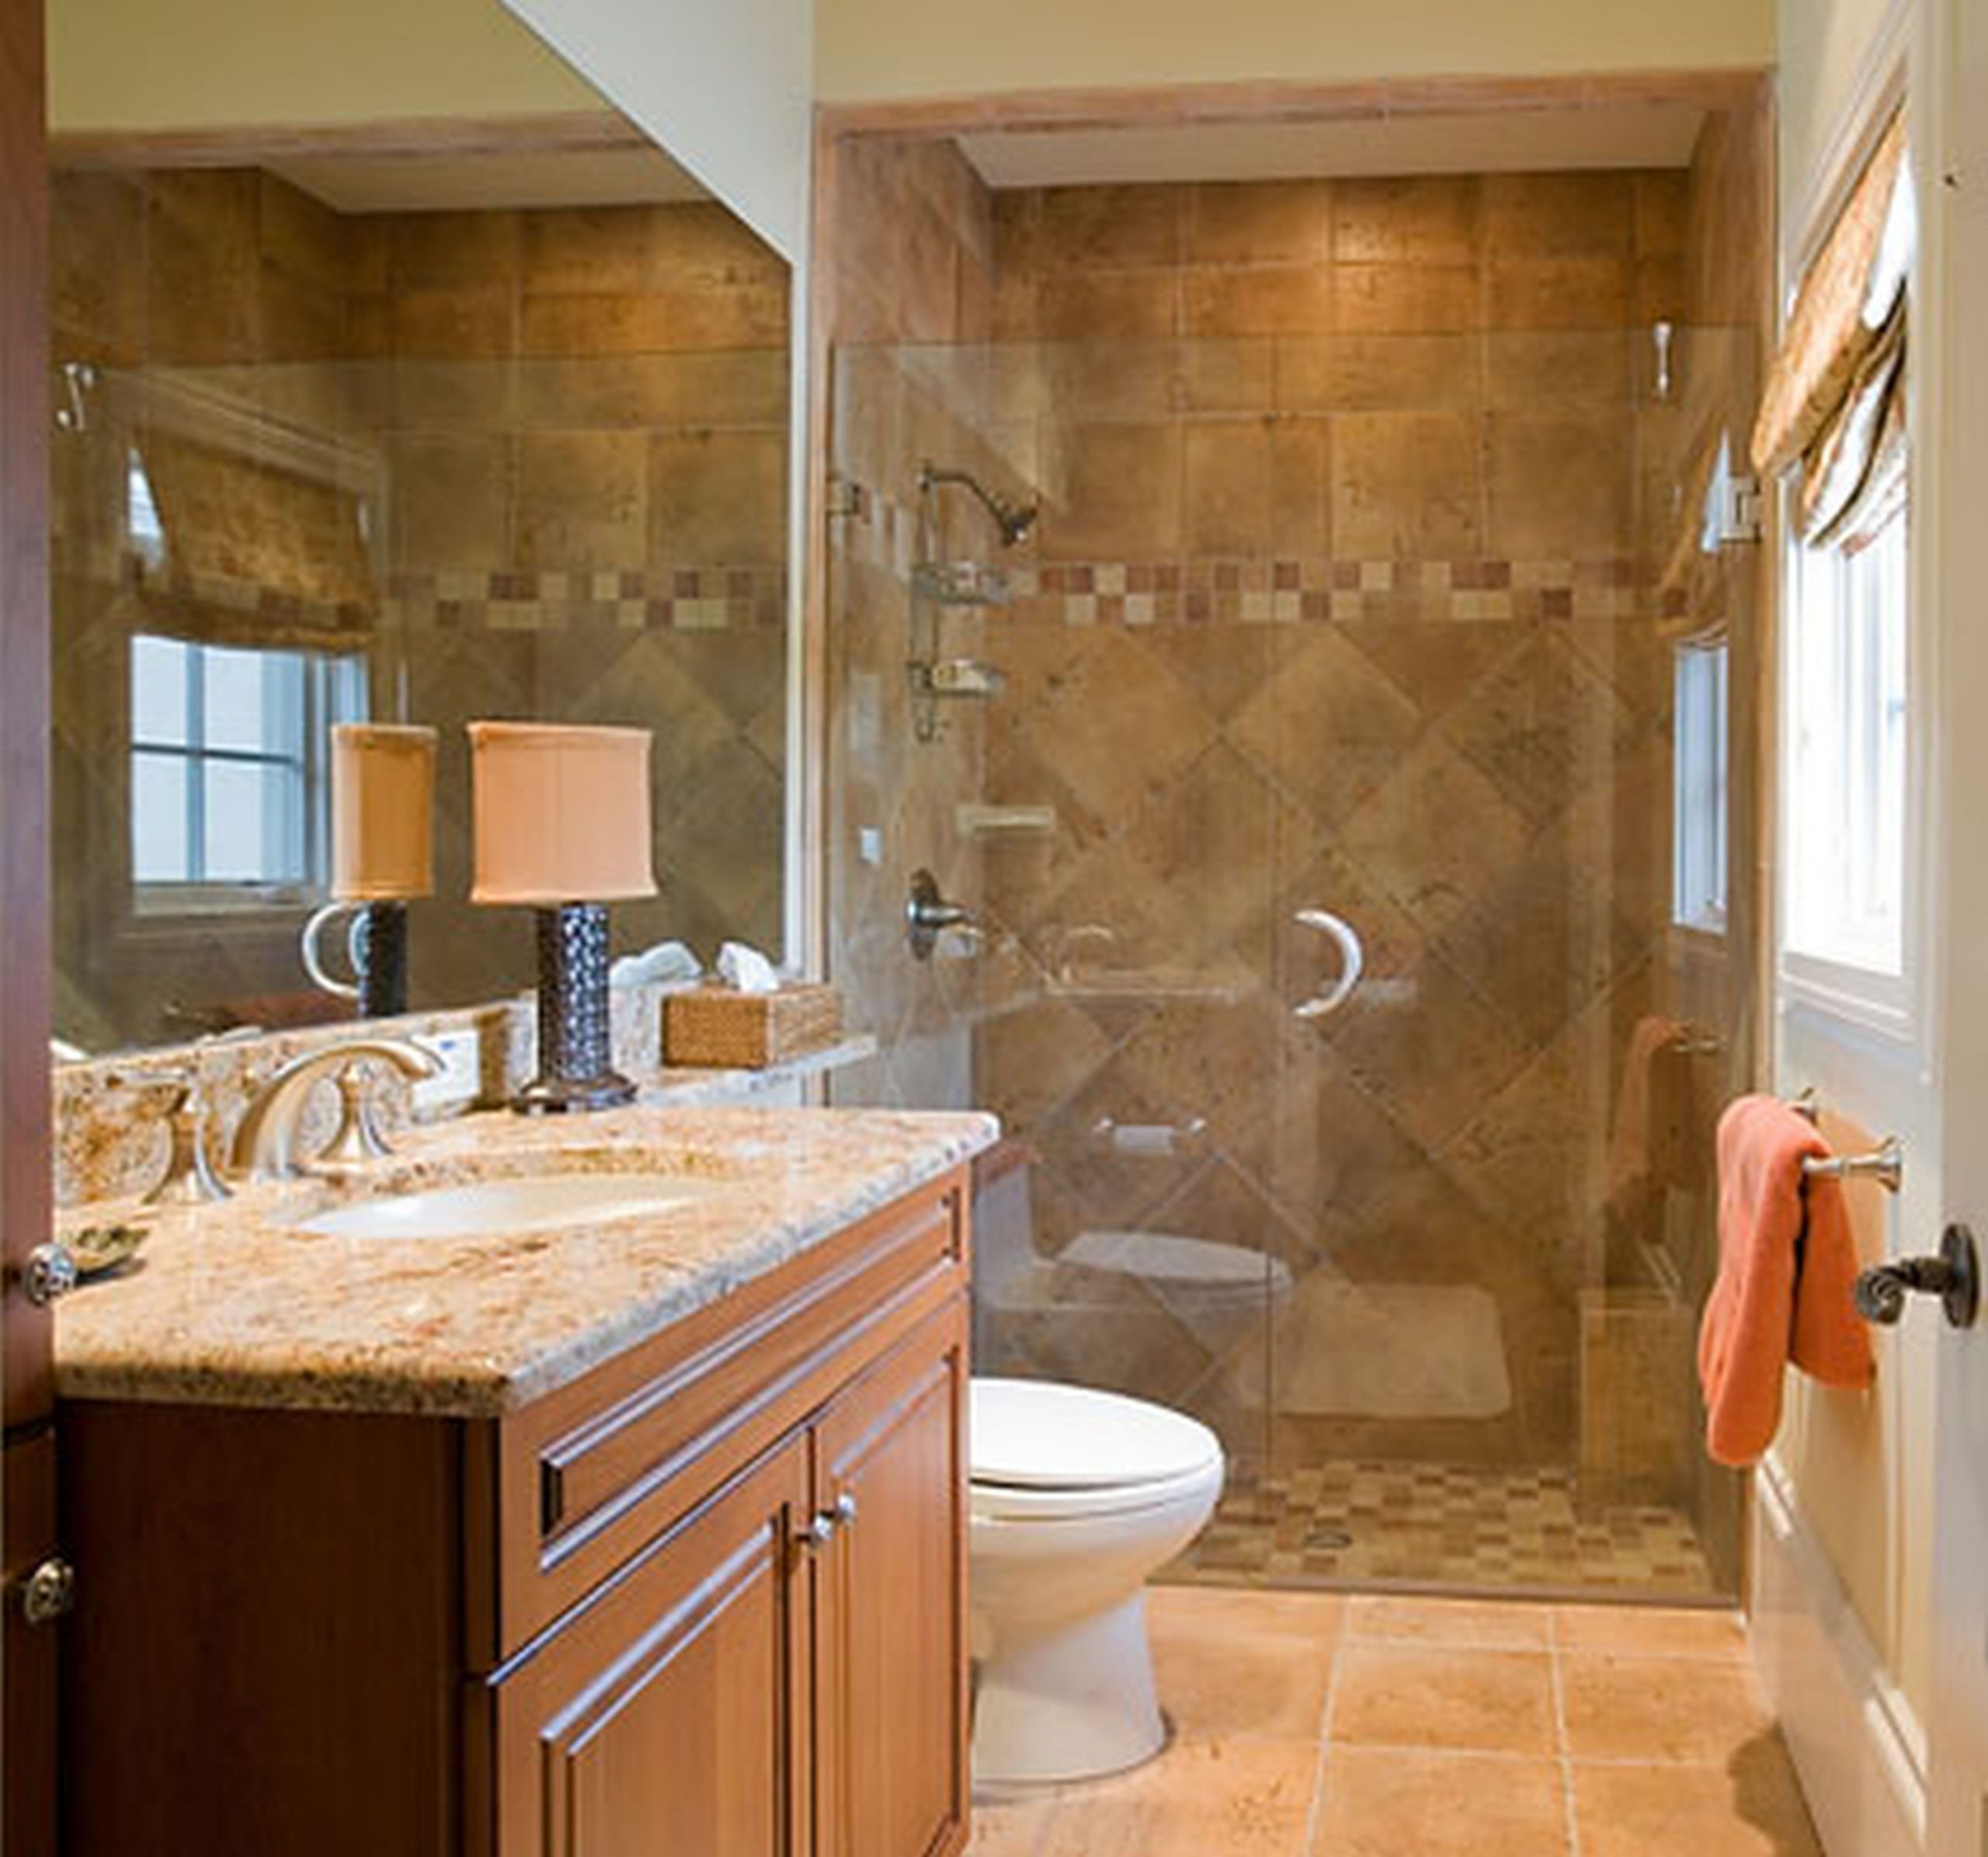 Remodeling Small Bathrooms
 Small Bathroom Remodel Ideas in Varied Modern Concepts